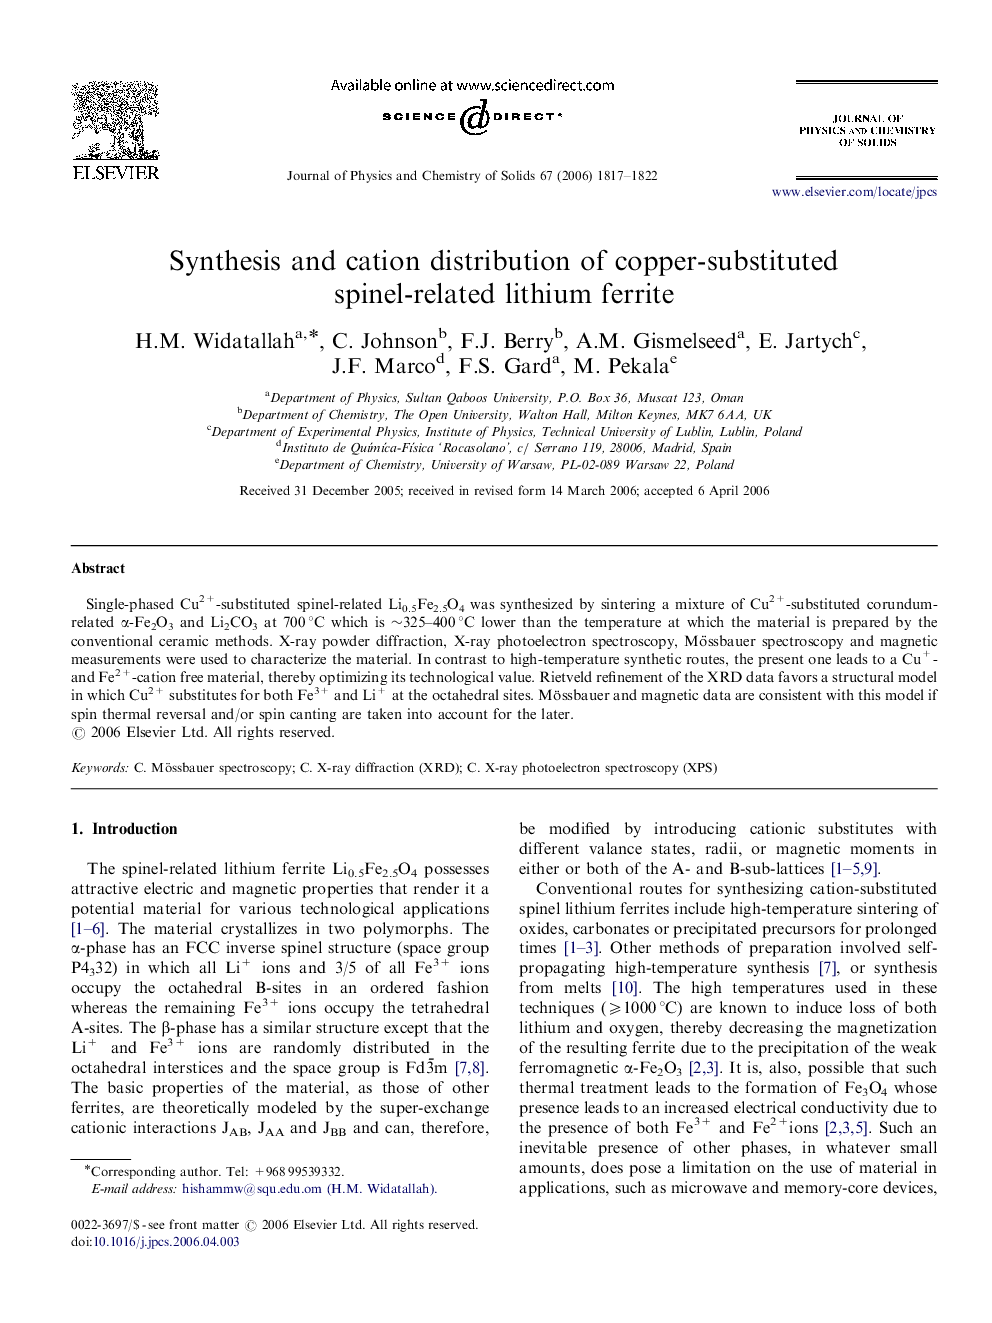 Synthesis and cation distribution of copper-substituted spinel-related lithium ferrite